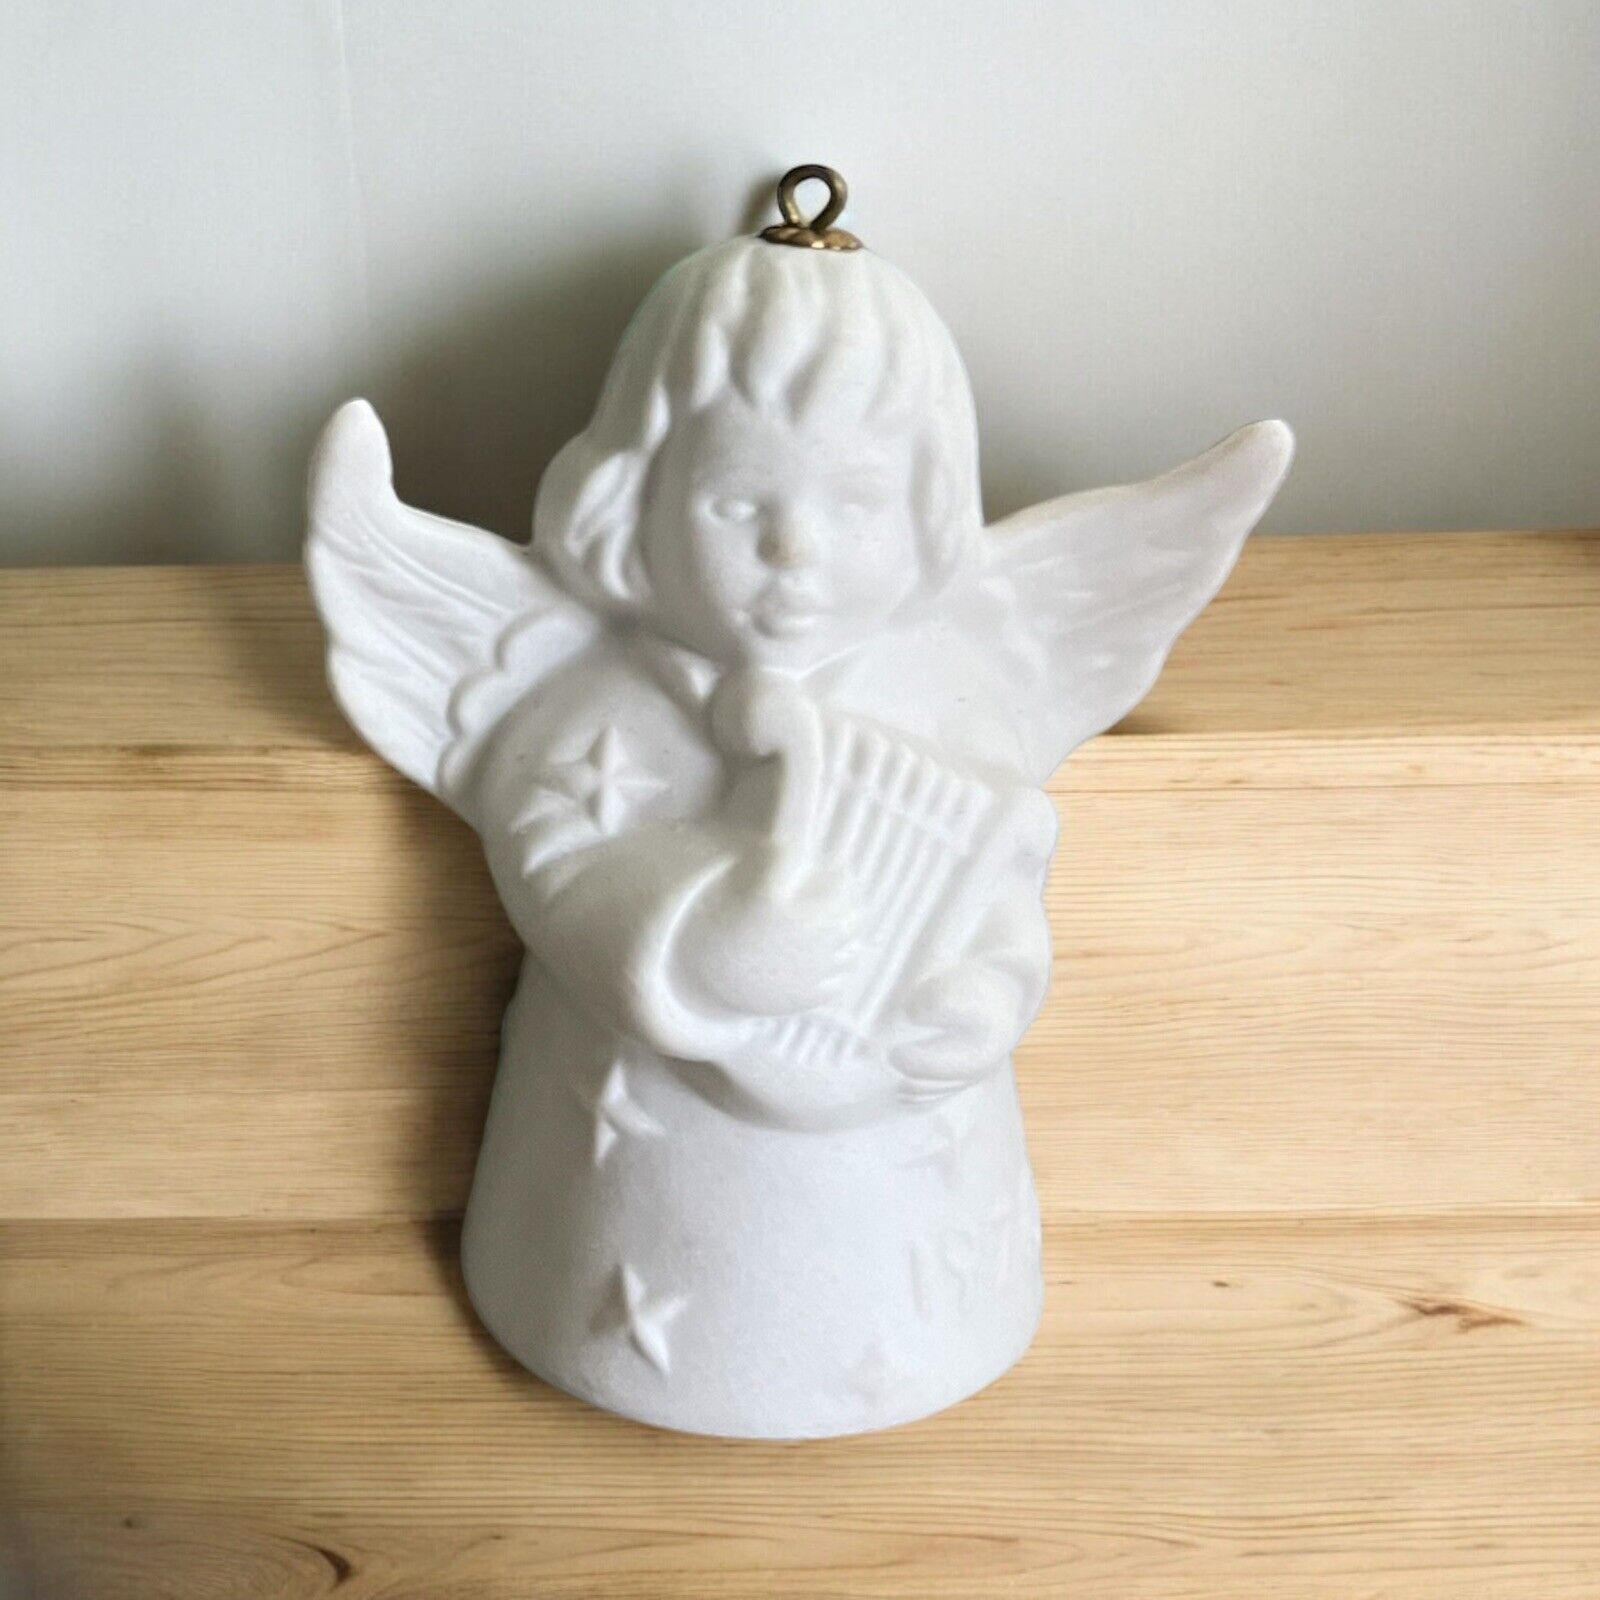 1998 Goebel White ANGEL BELL ORNAMENT: Excellent Condition. Box Is Green (rough)